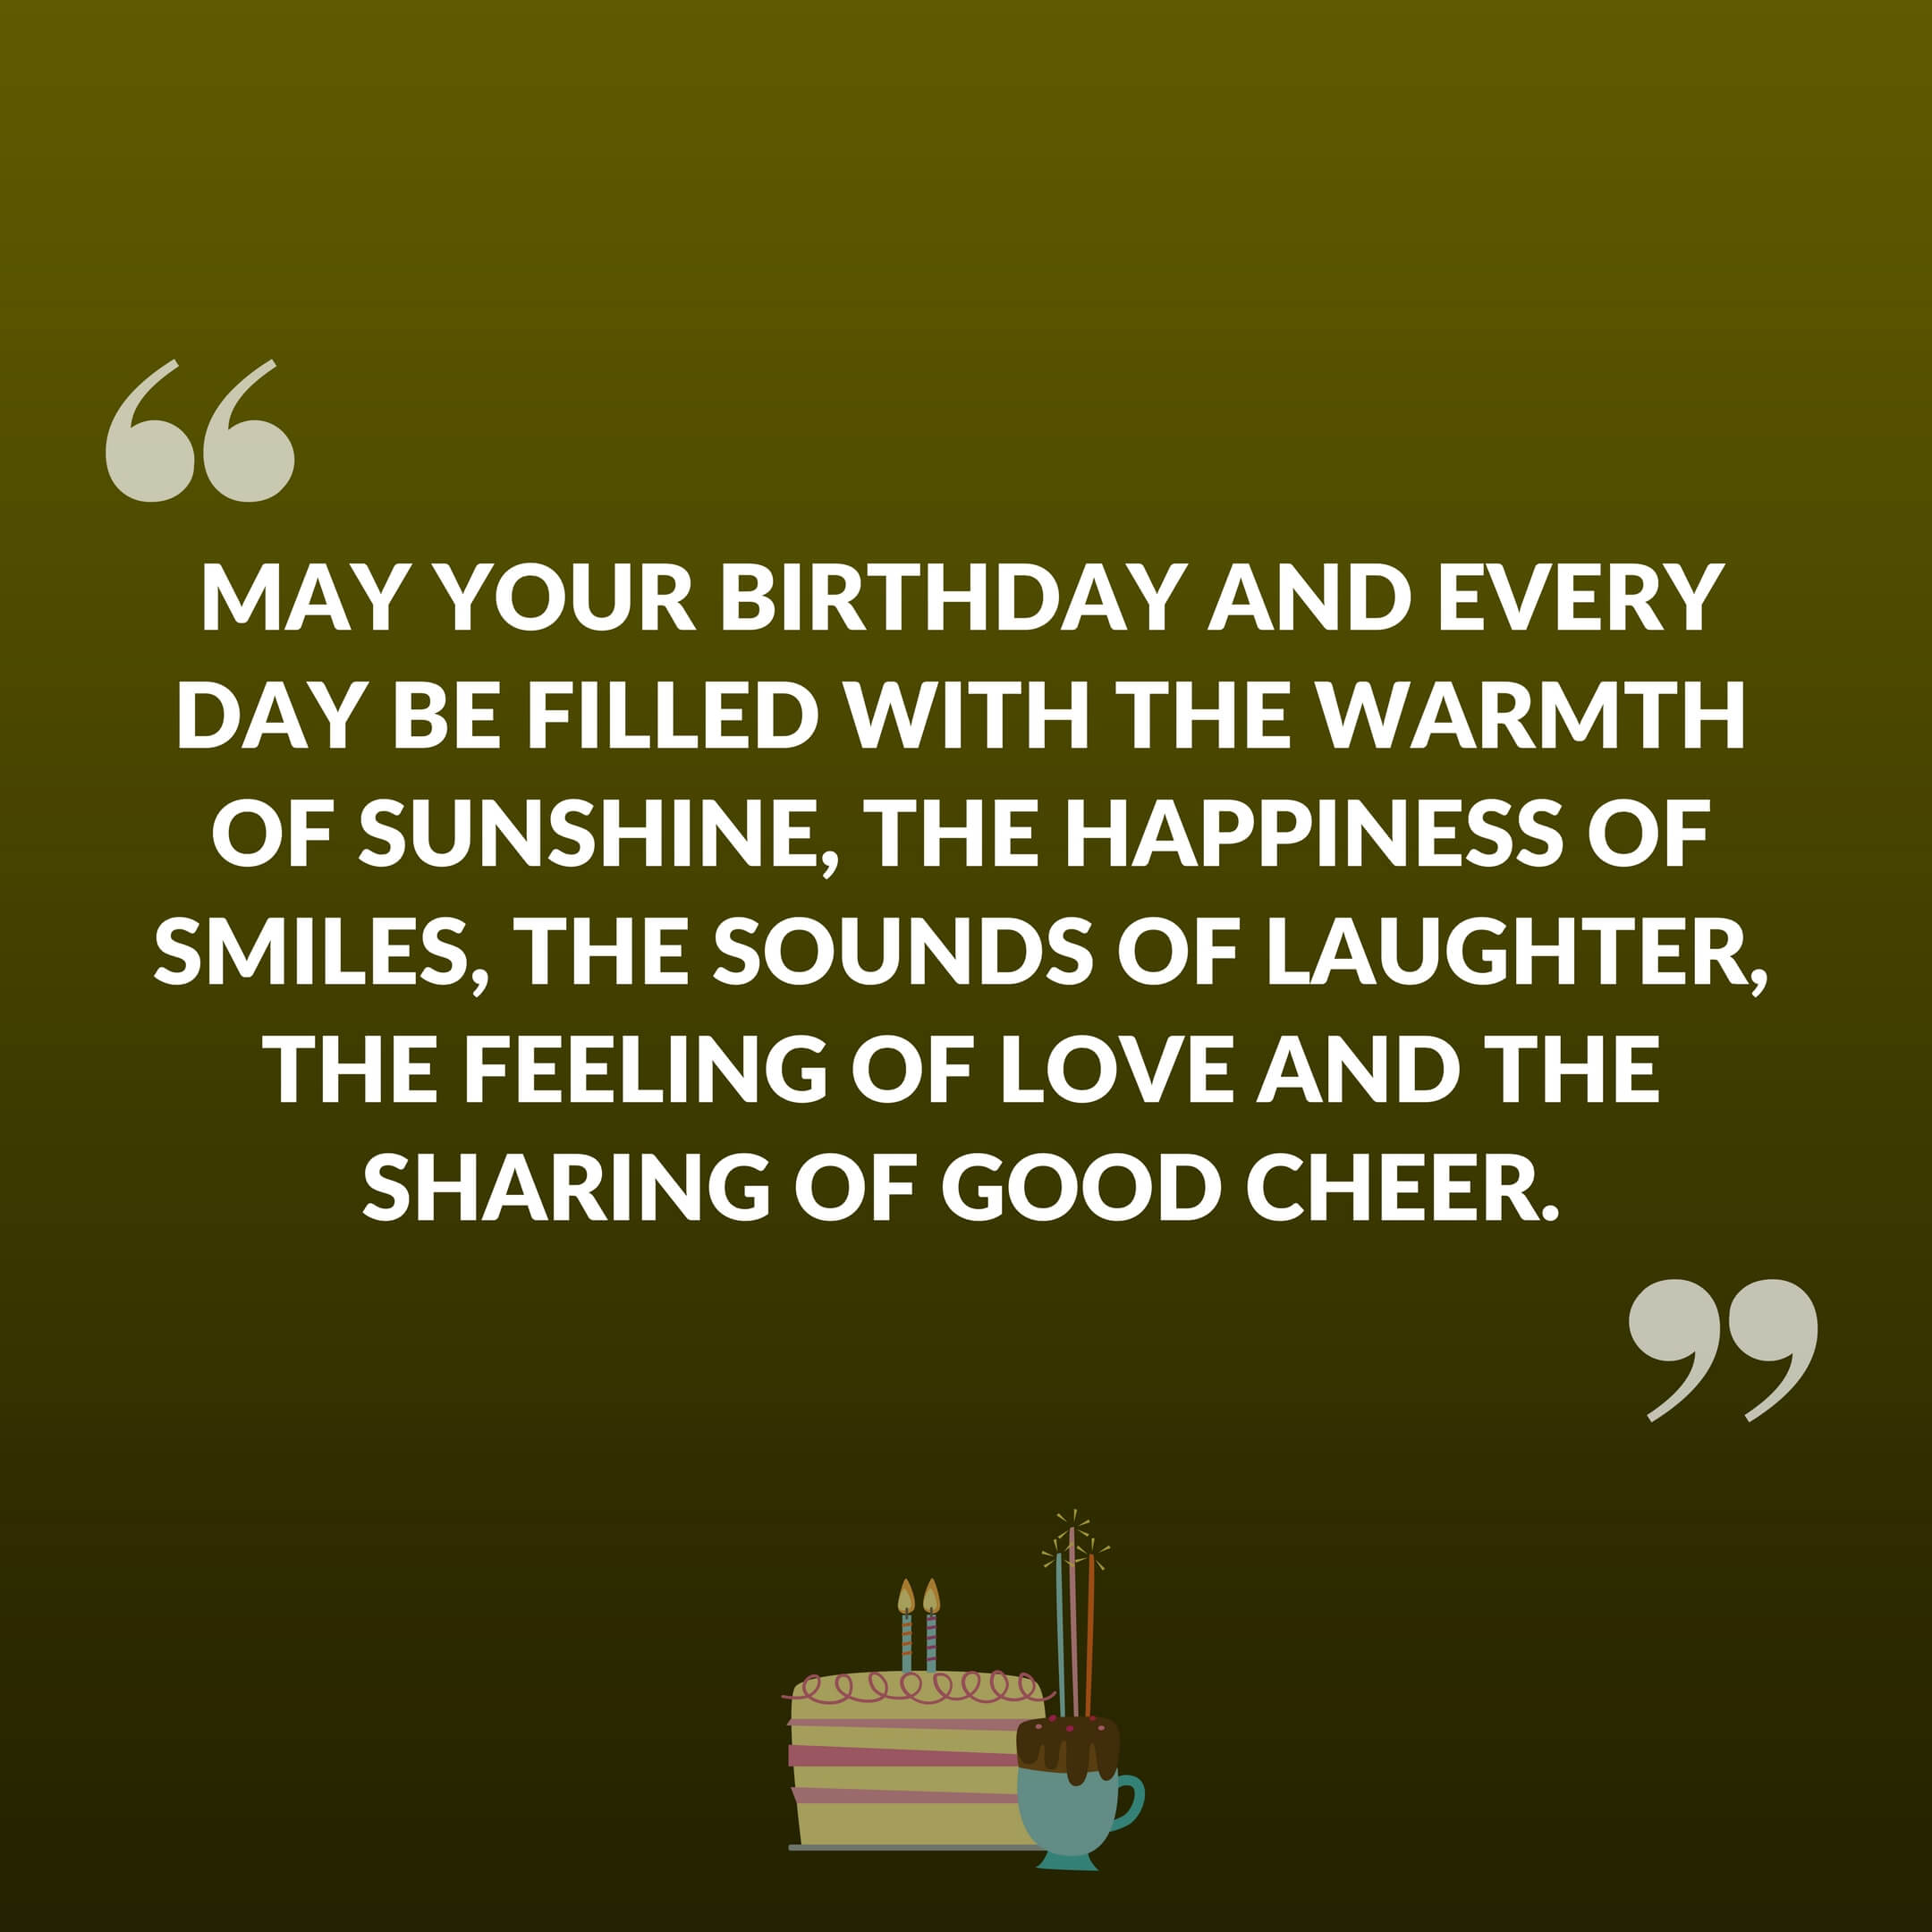 May your birthday and every day be filled with the warmth of sunshine, the happiness of smiles, the sounds of laughter, the feeling of love and the sharing of good cheer.